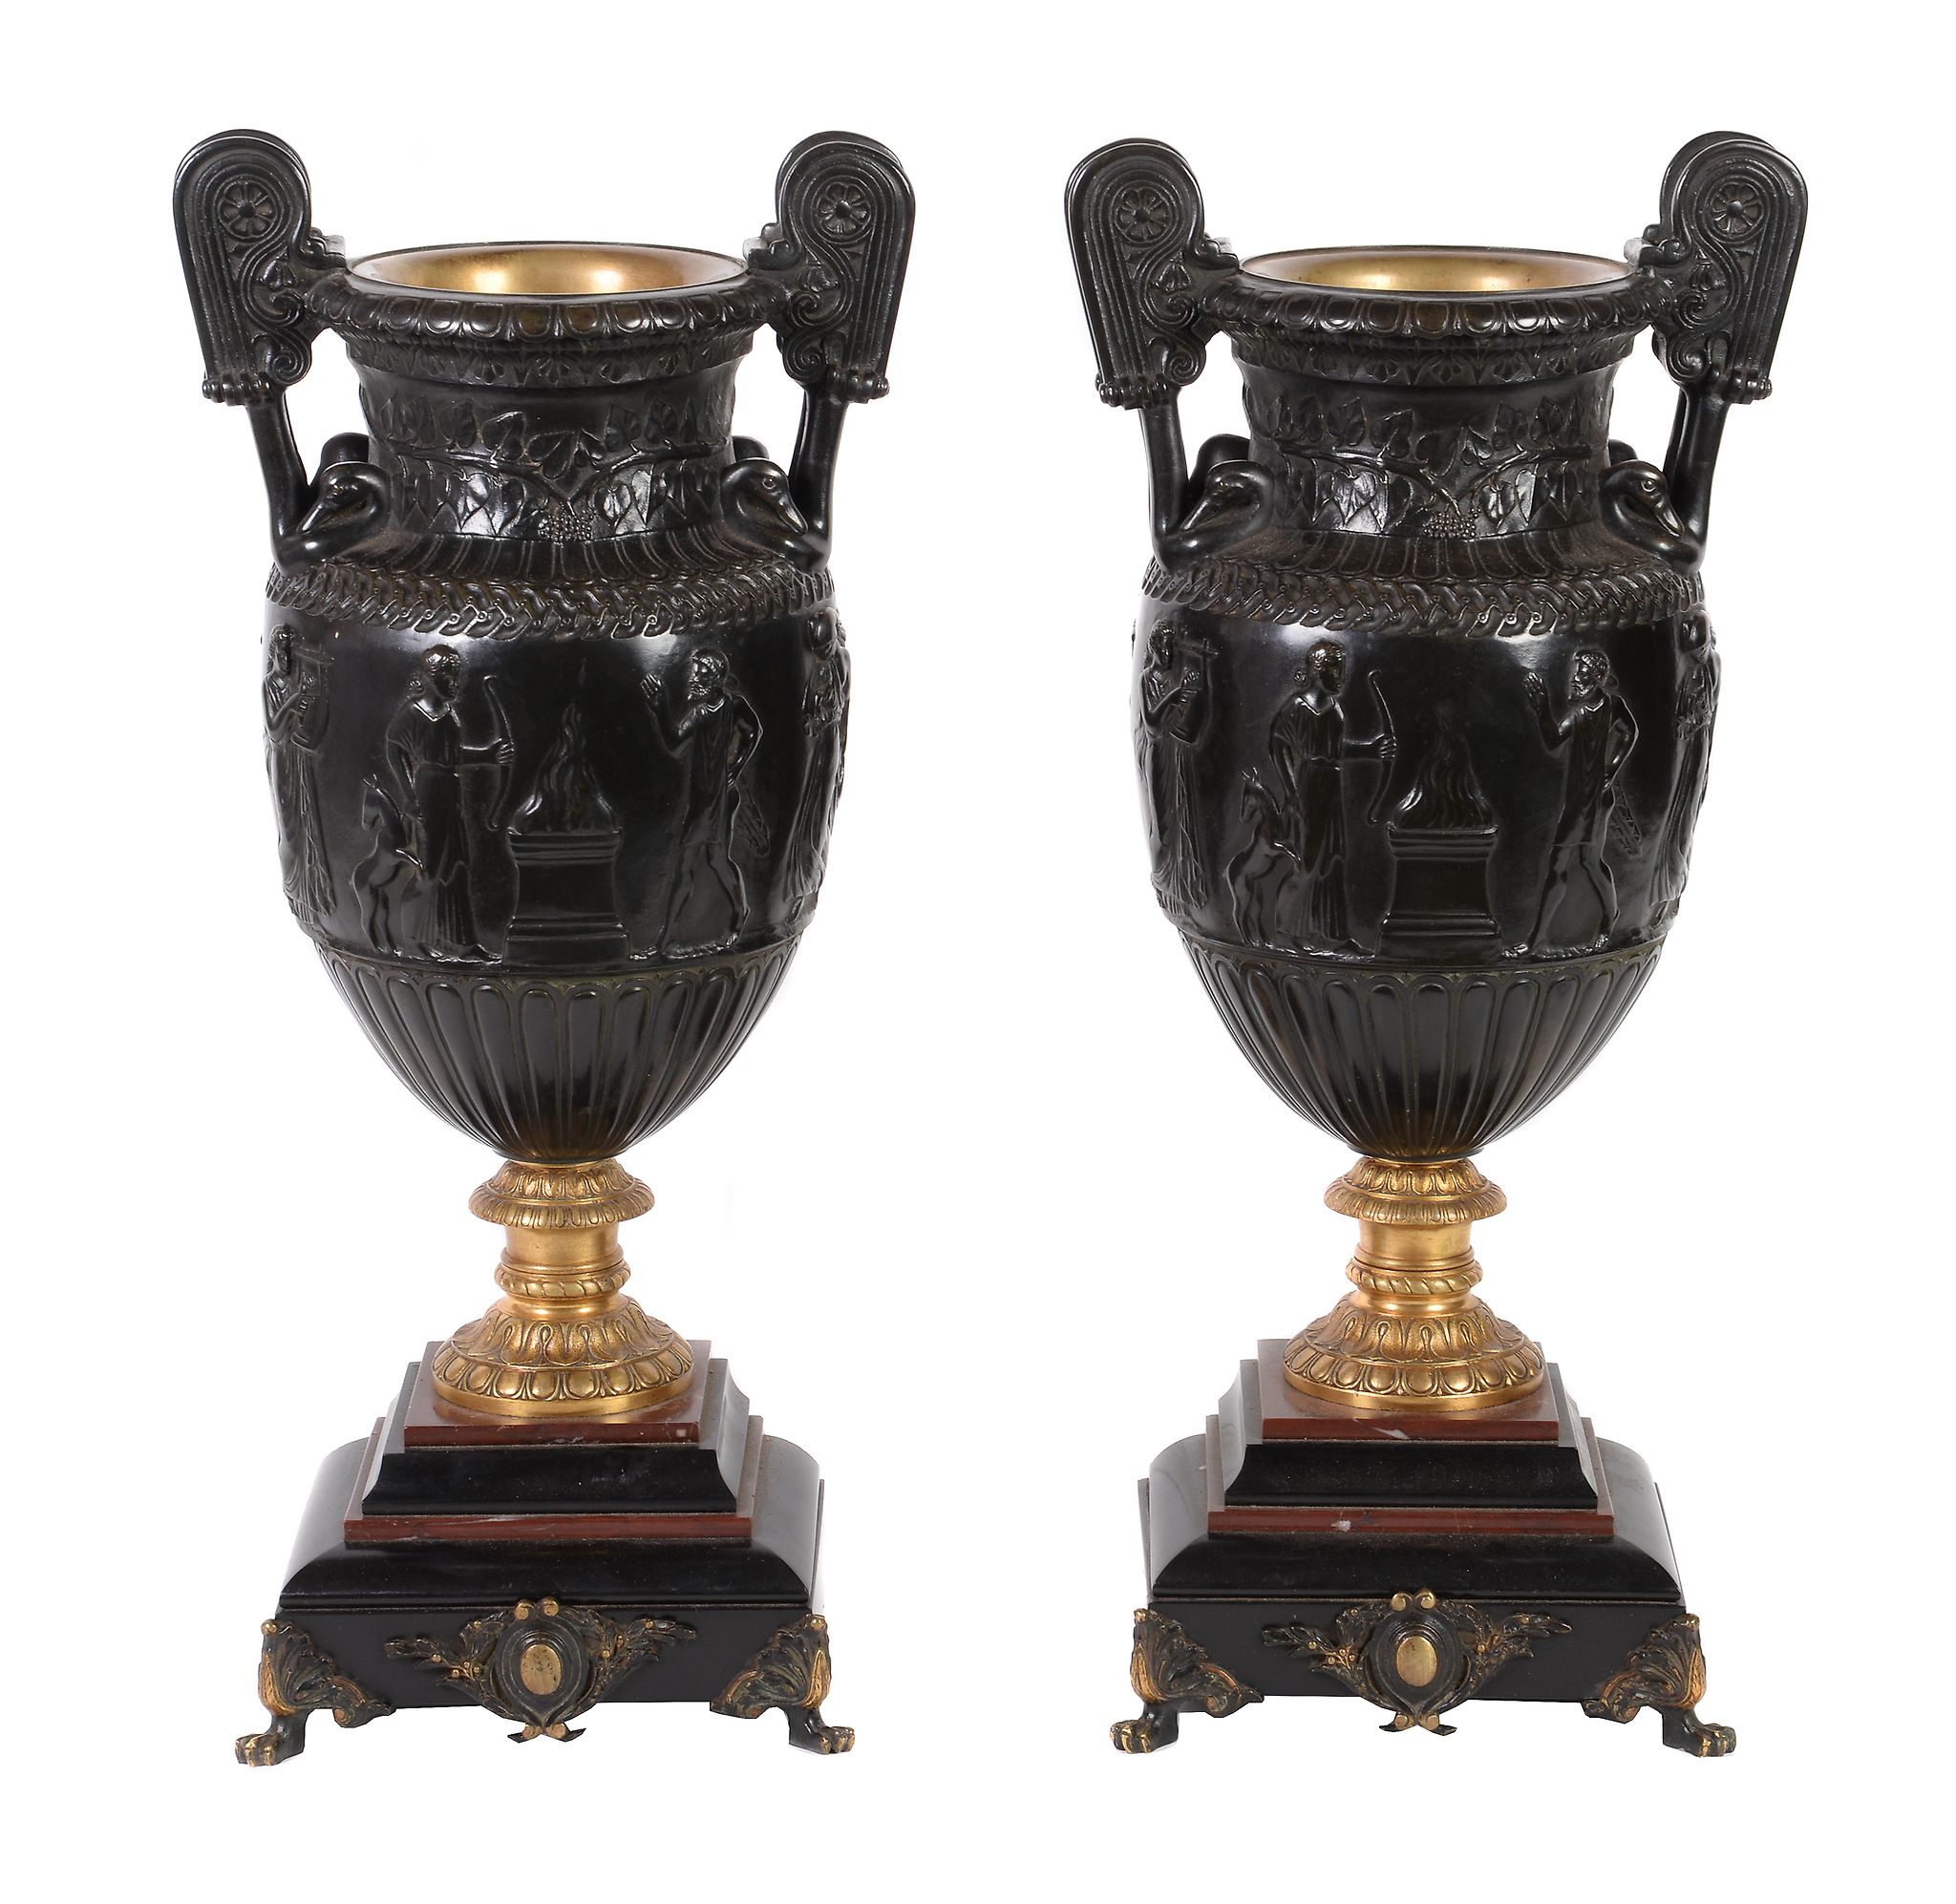 A pair of patinated and parcel gilt bronze vases in the manner of the Townley Vase, circa 1880,